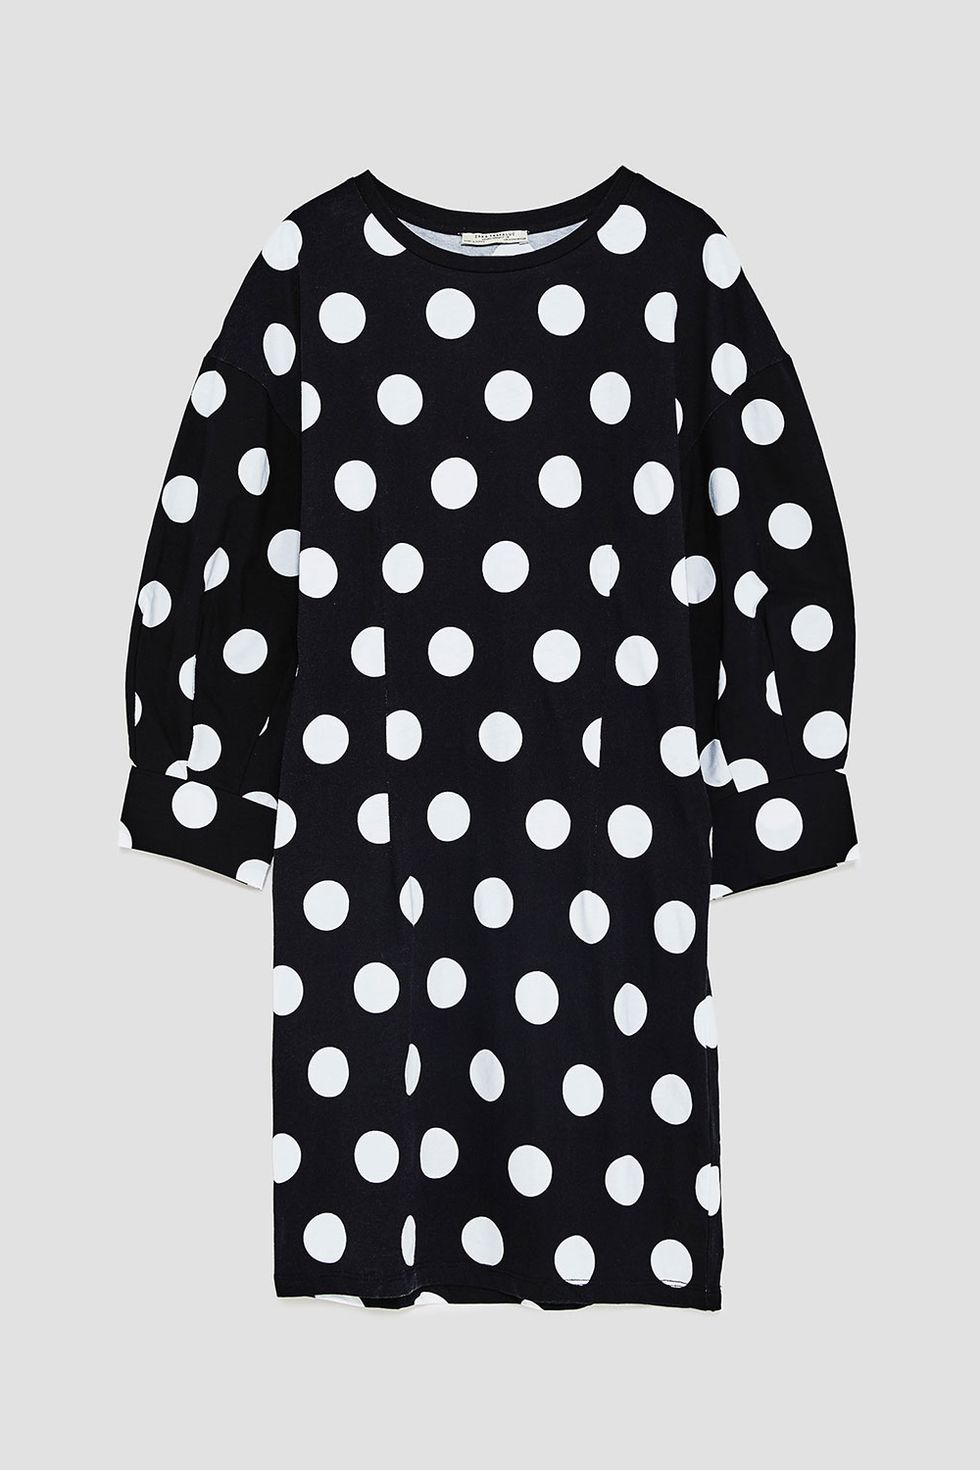 Pattern, Clothing, Polka dot, Product, Design, Sleeve, Performing arts, Music, Dance, Baby & toddler clothing, 